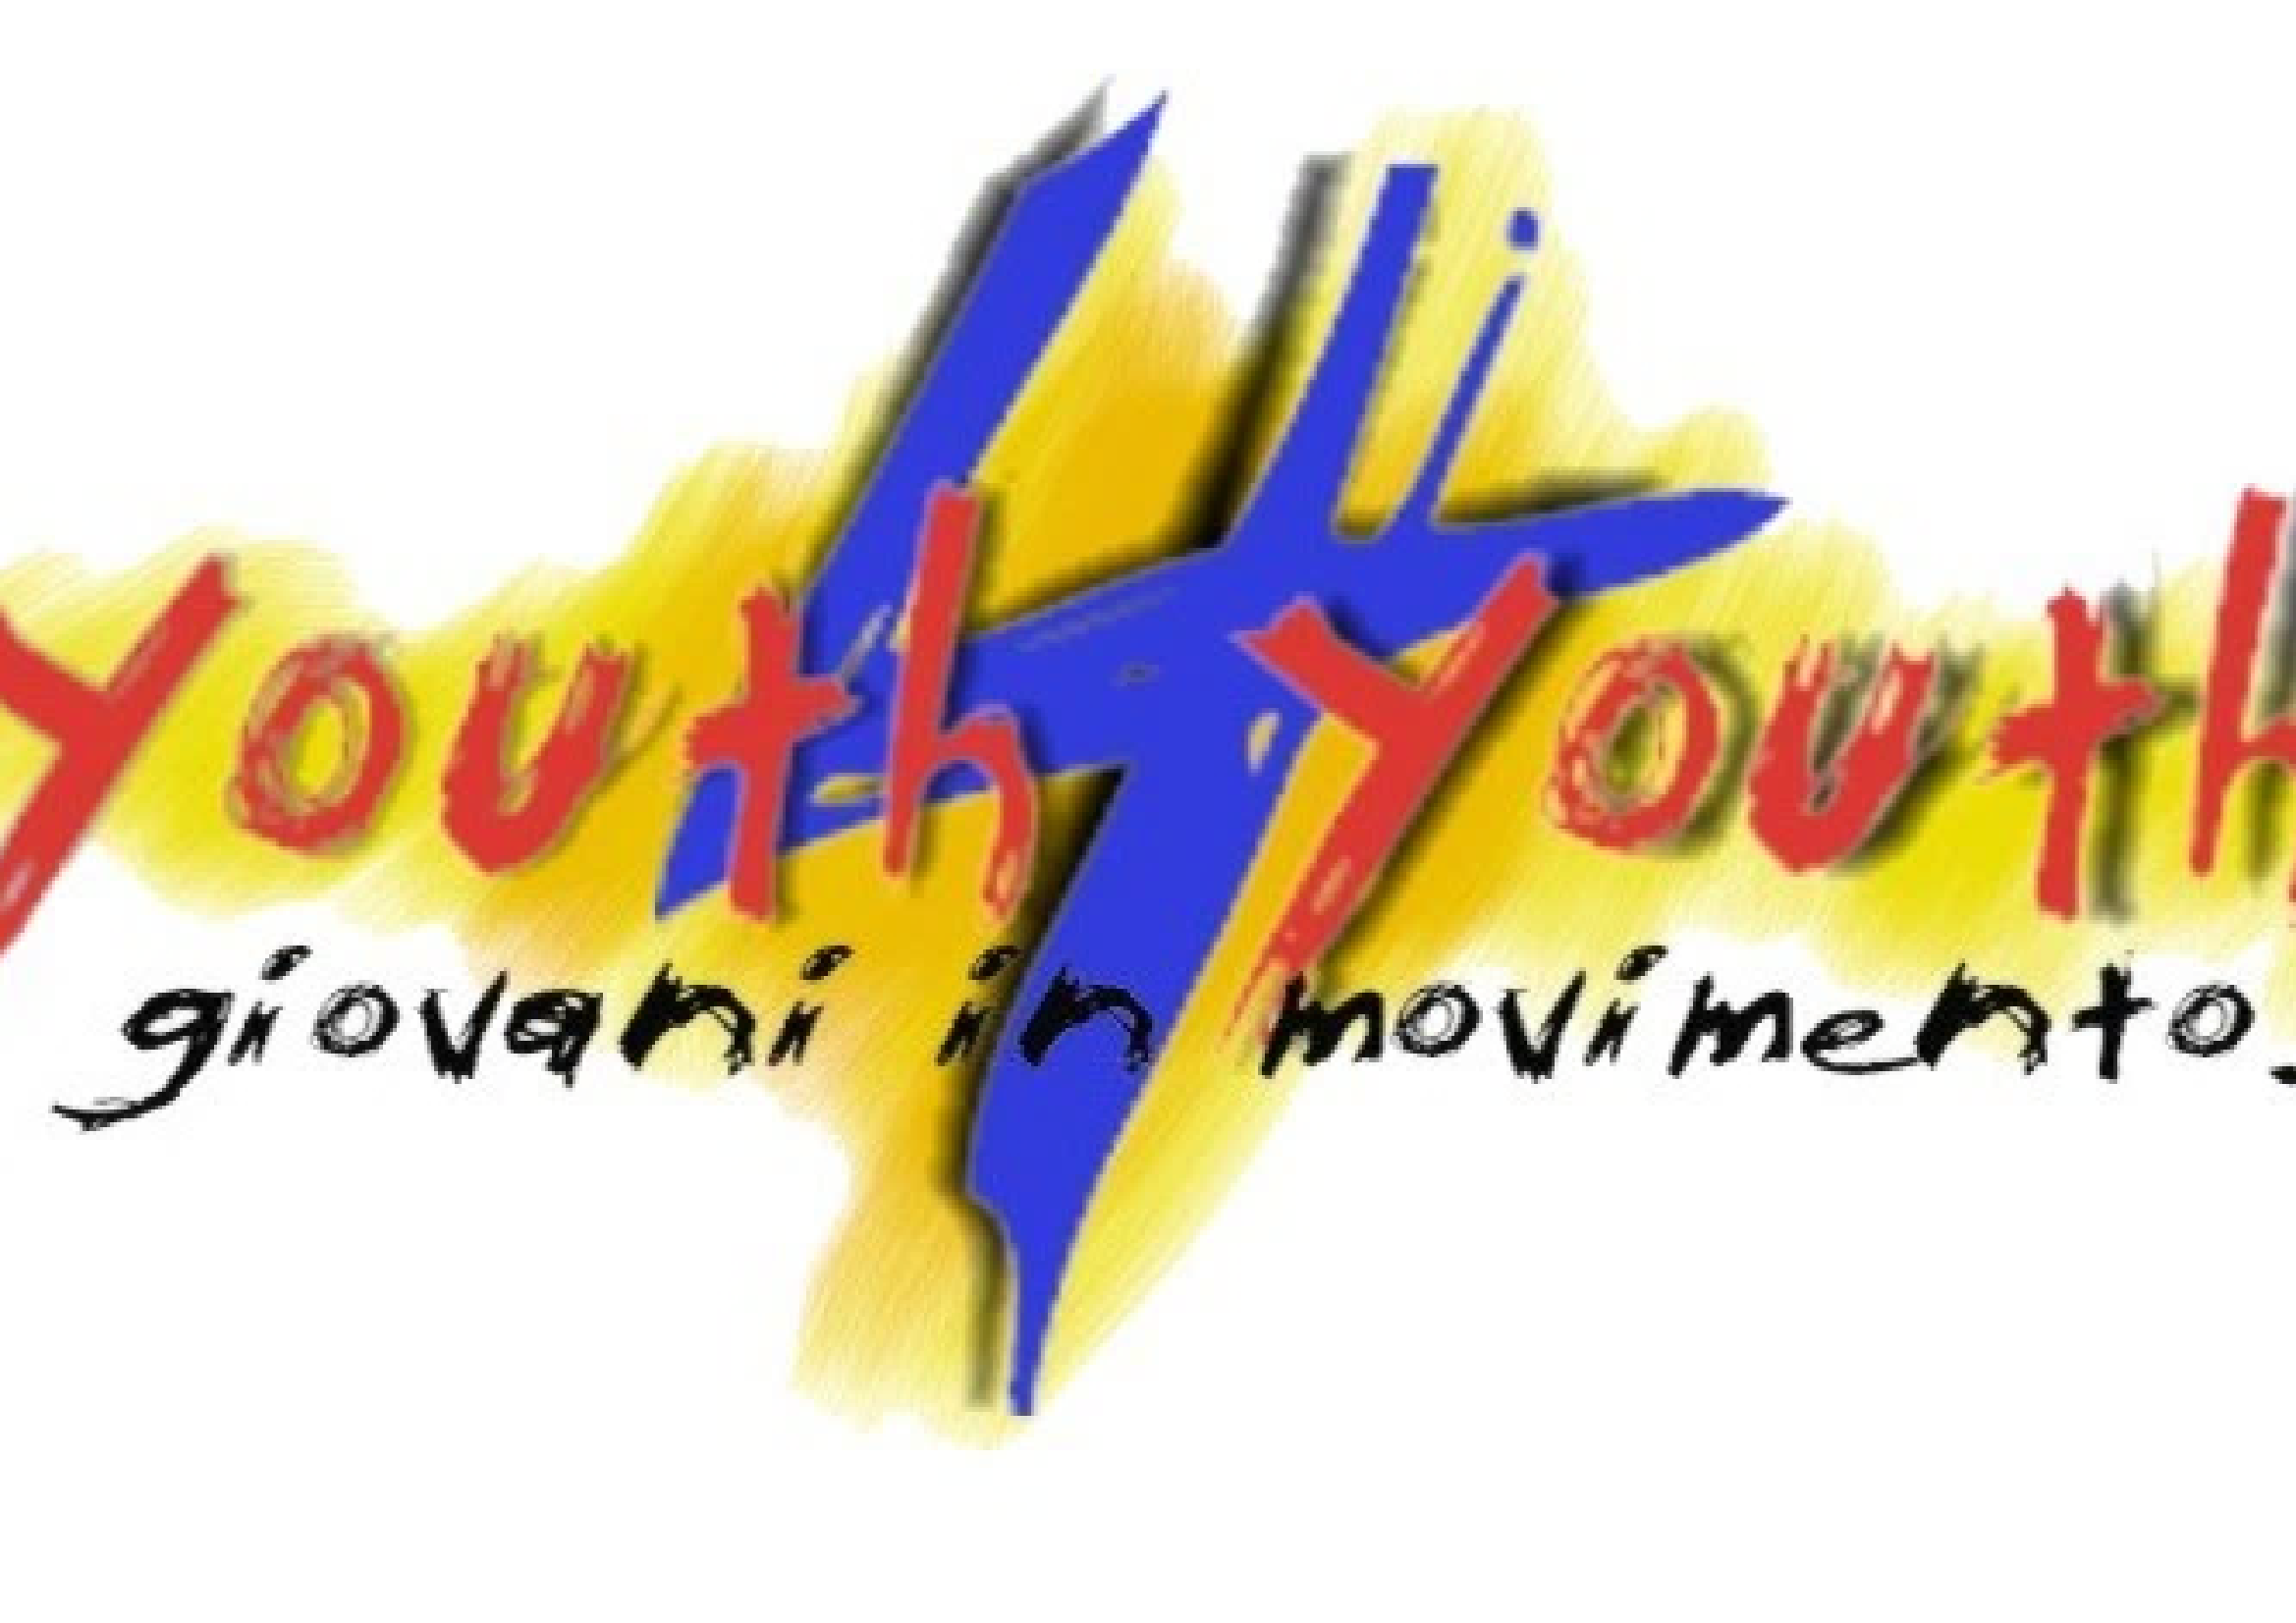 YOUTH&YOUTH